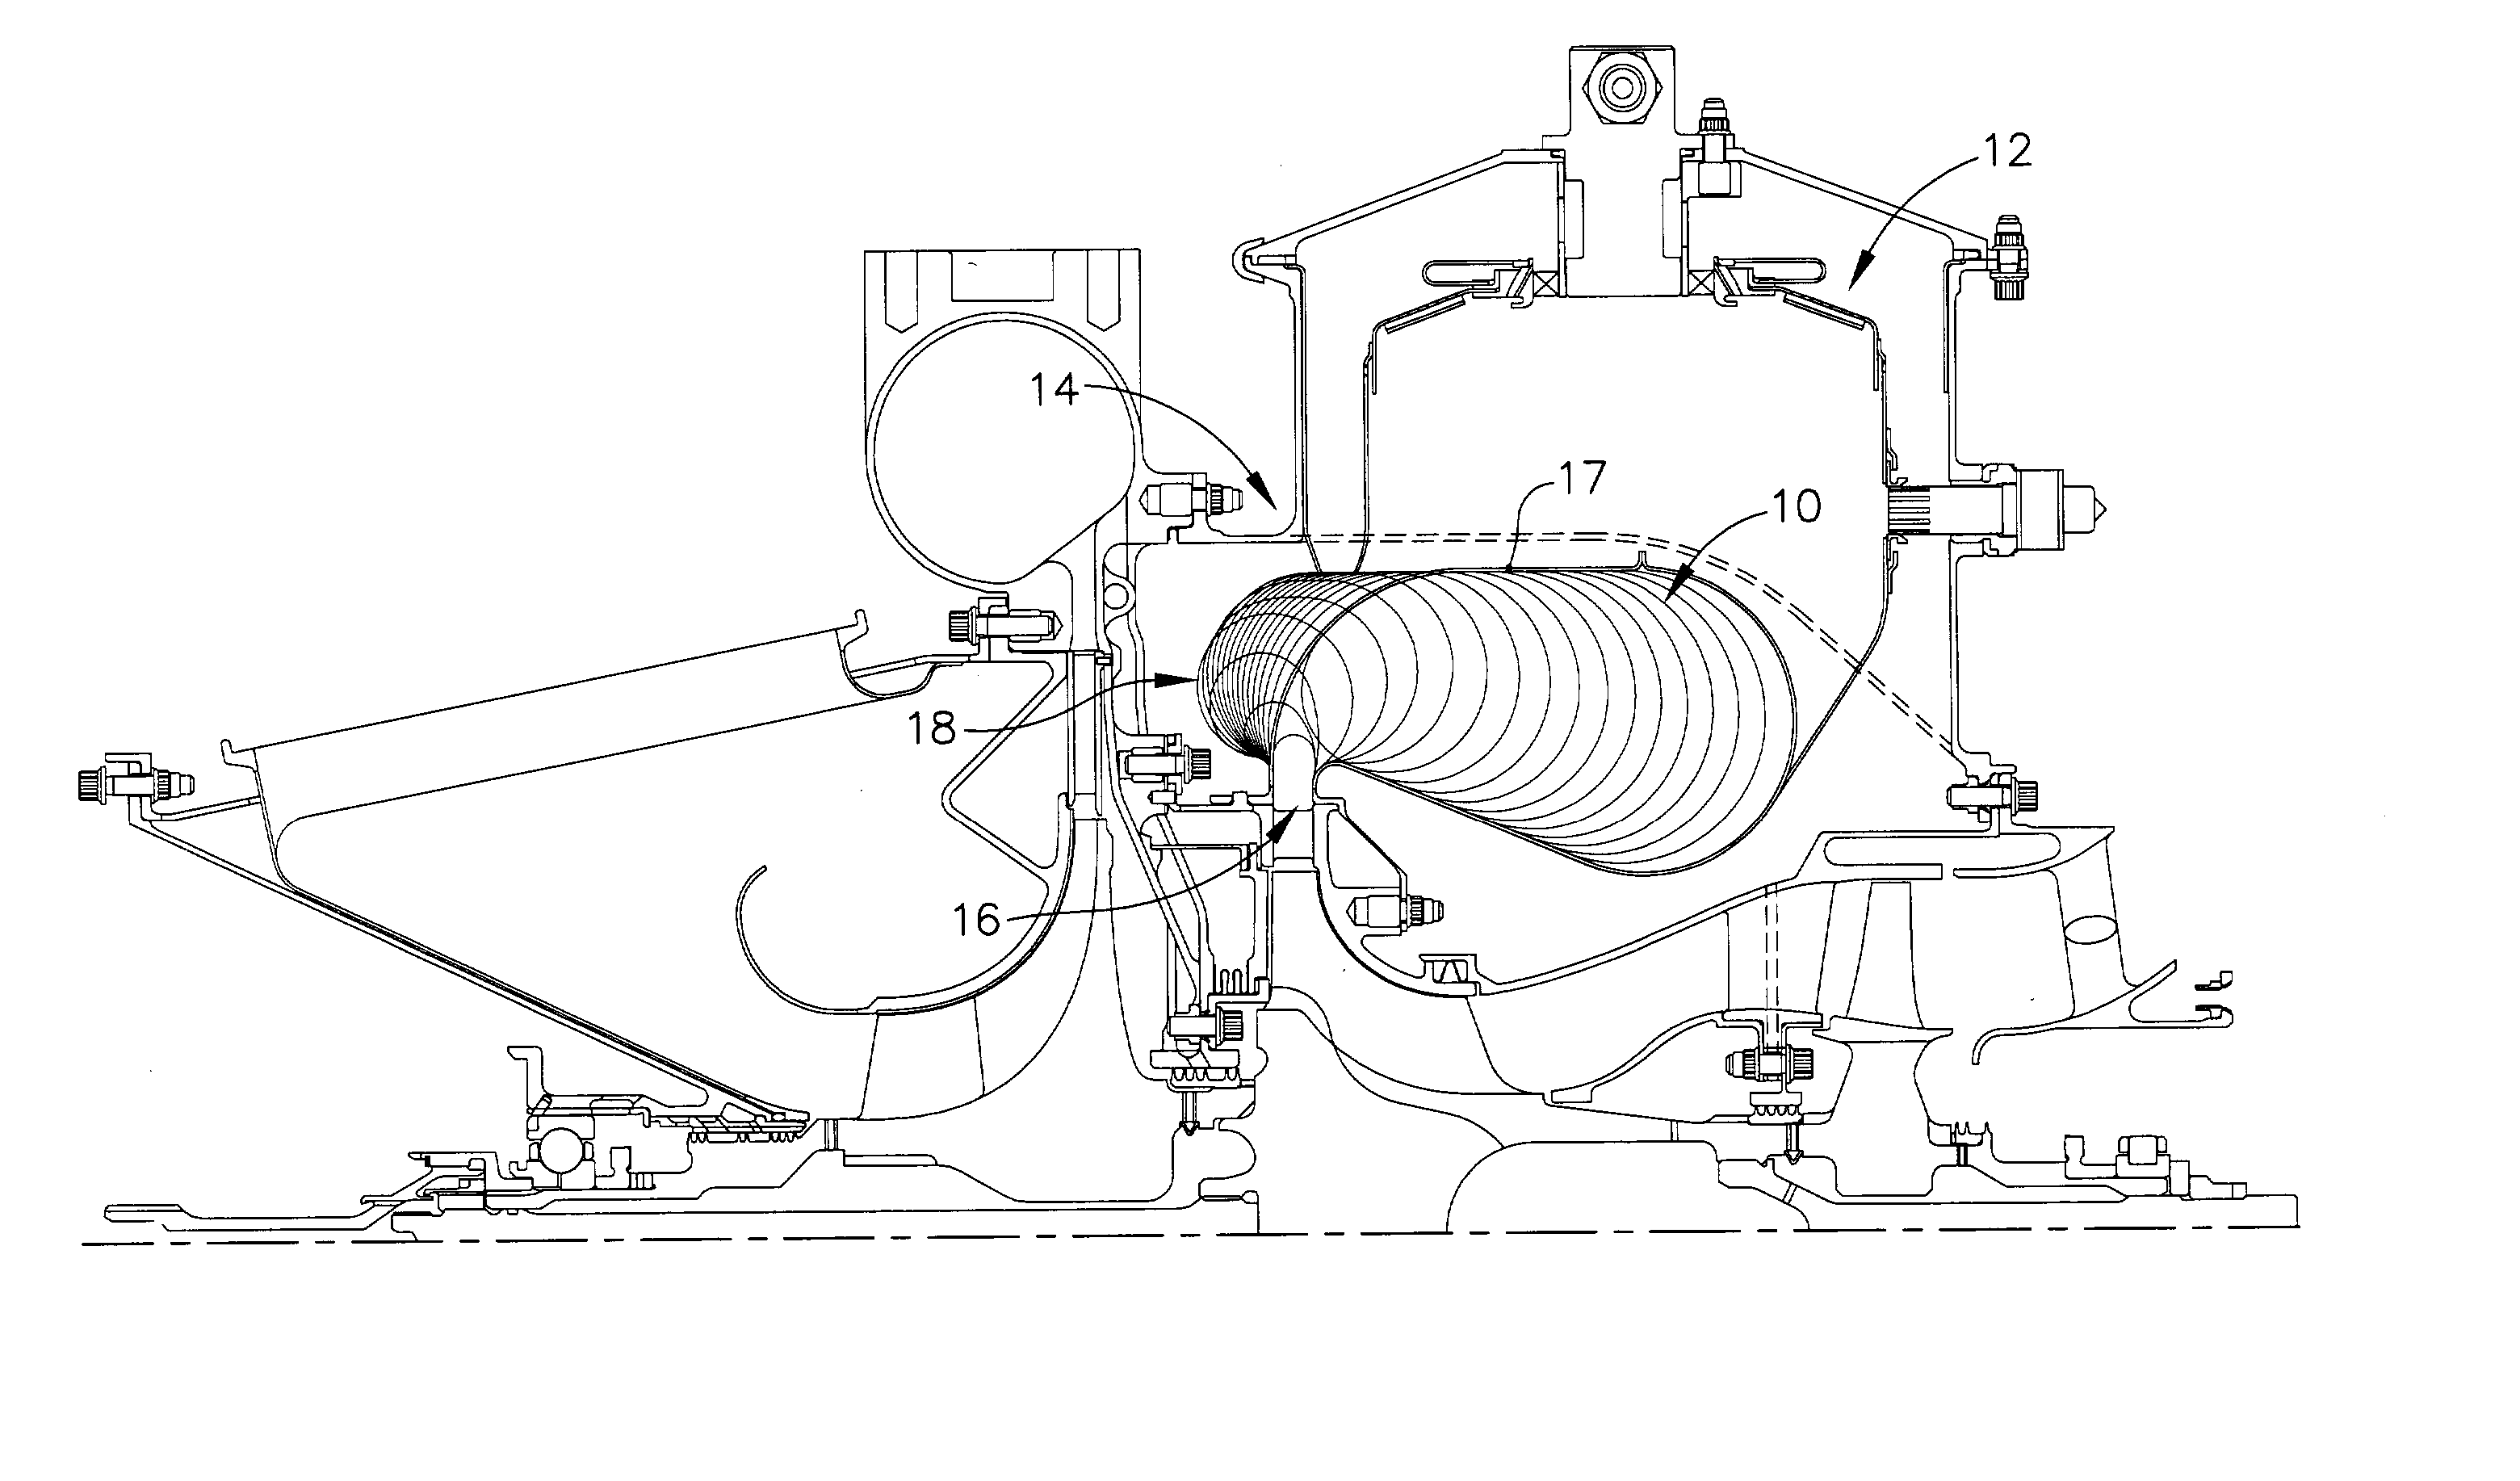 Conical helical of spiral combustor scroll device in gas turbine engine